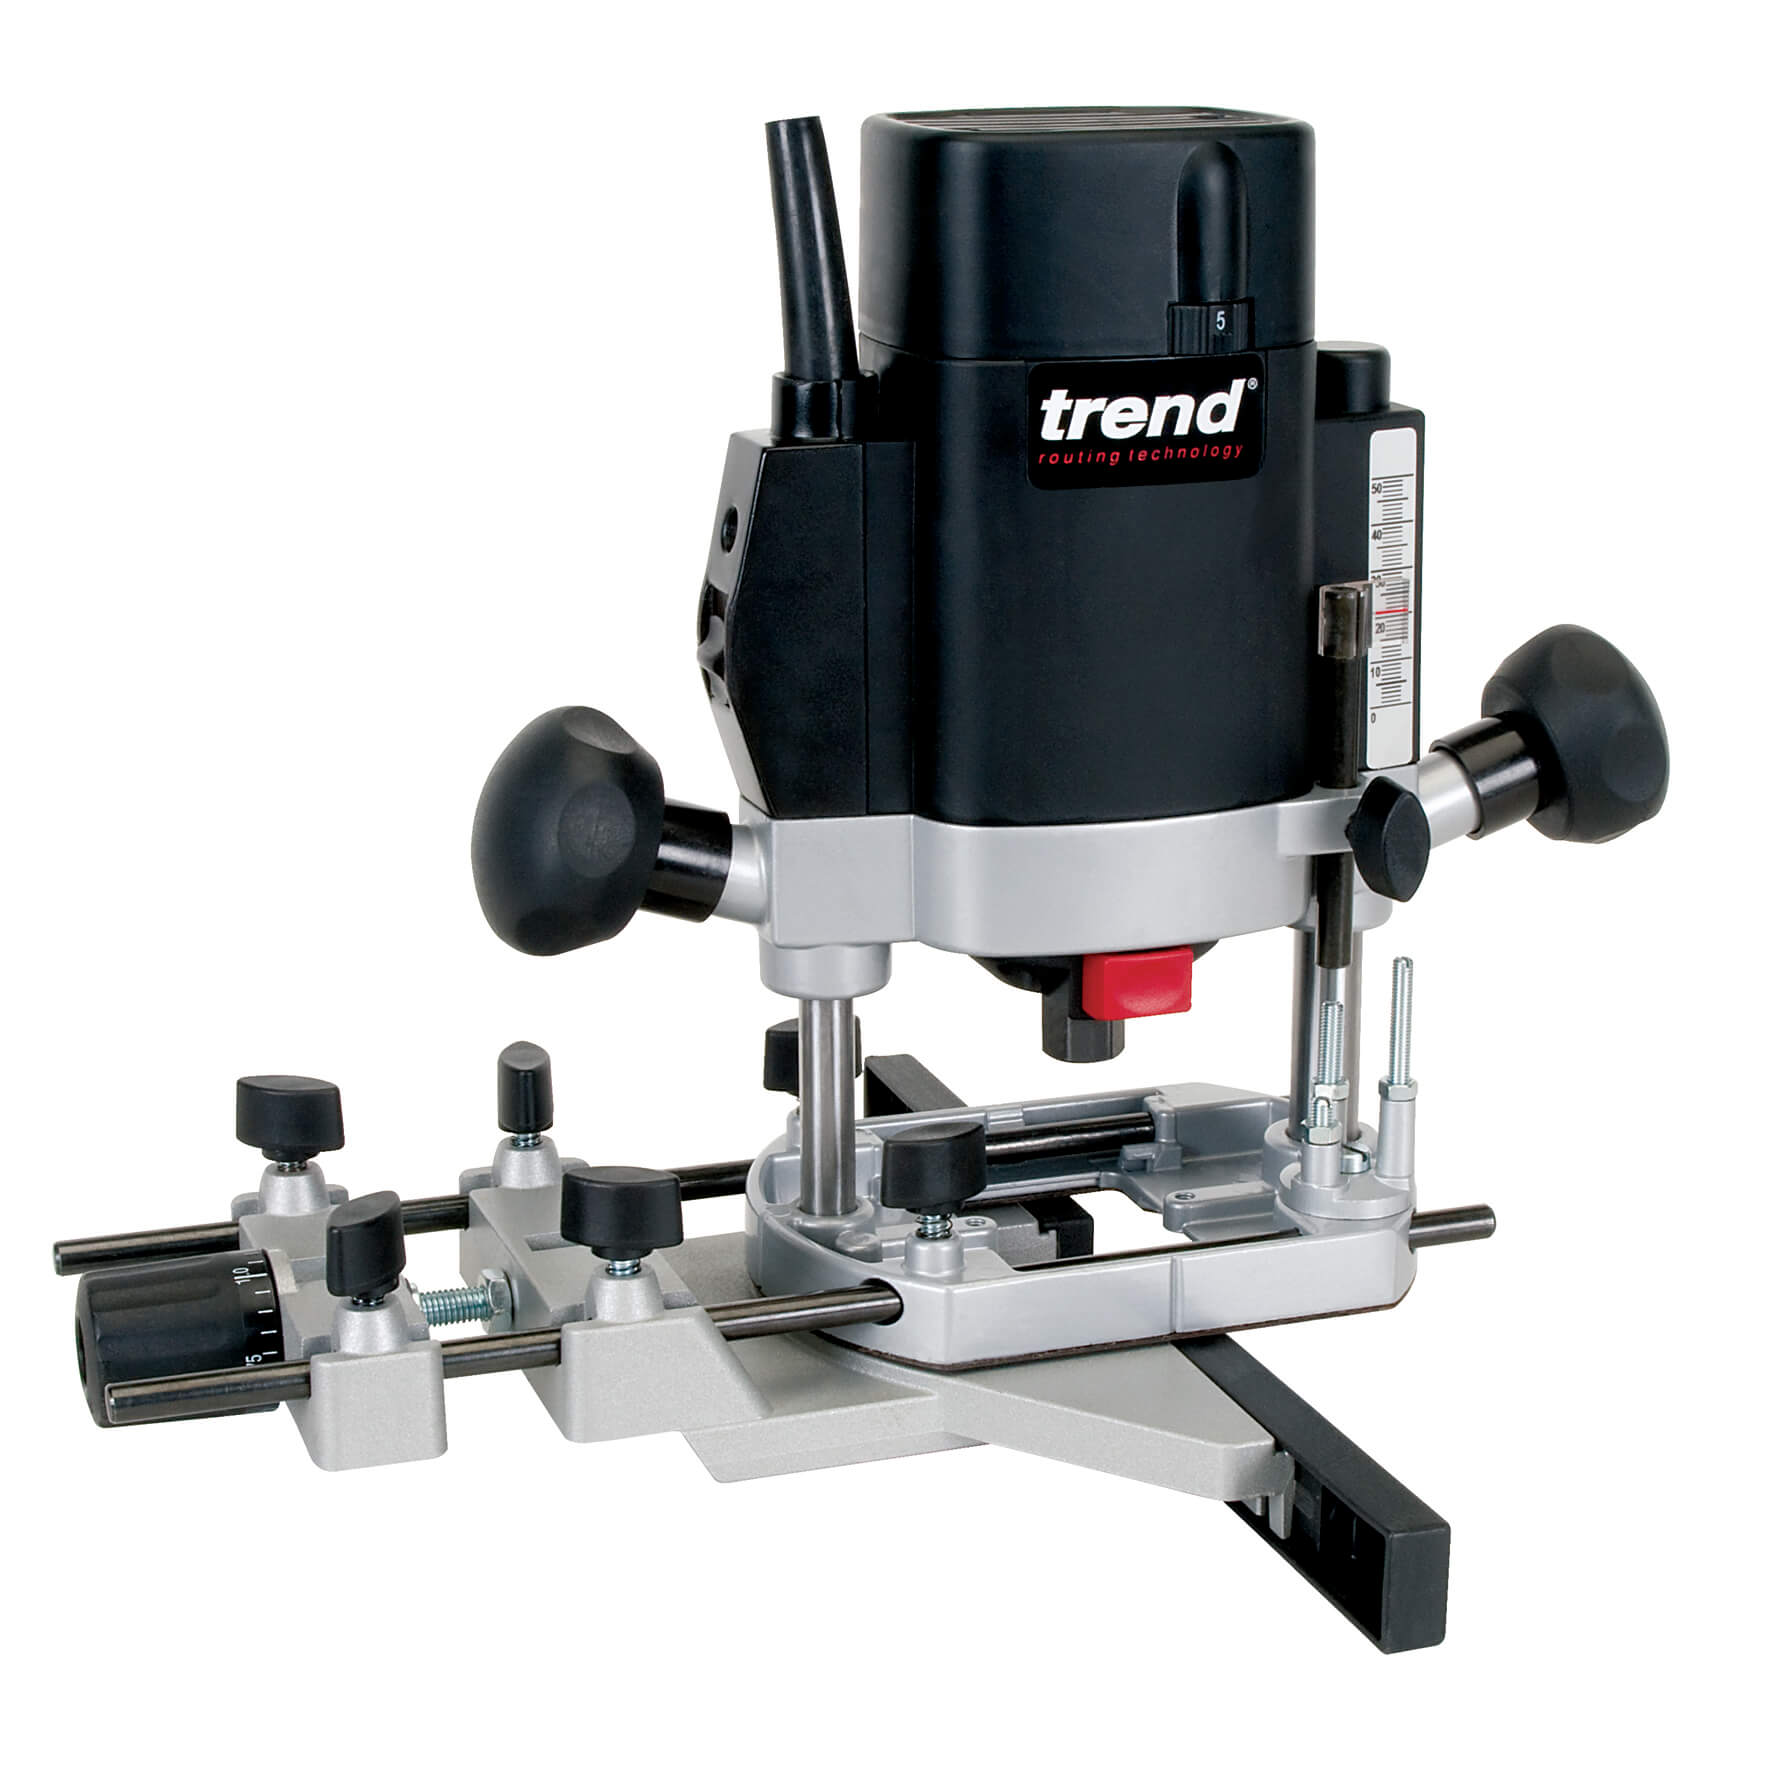 Trend Router T5 - 230V